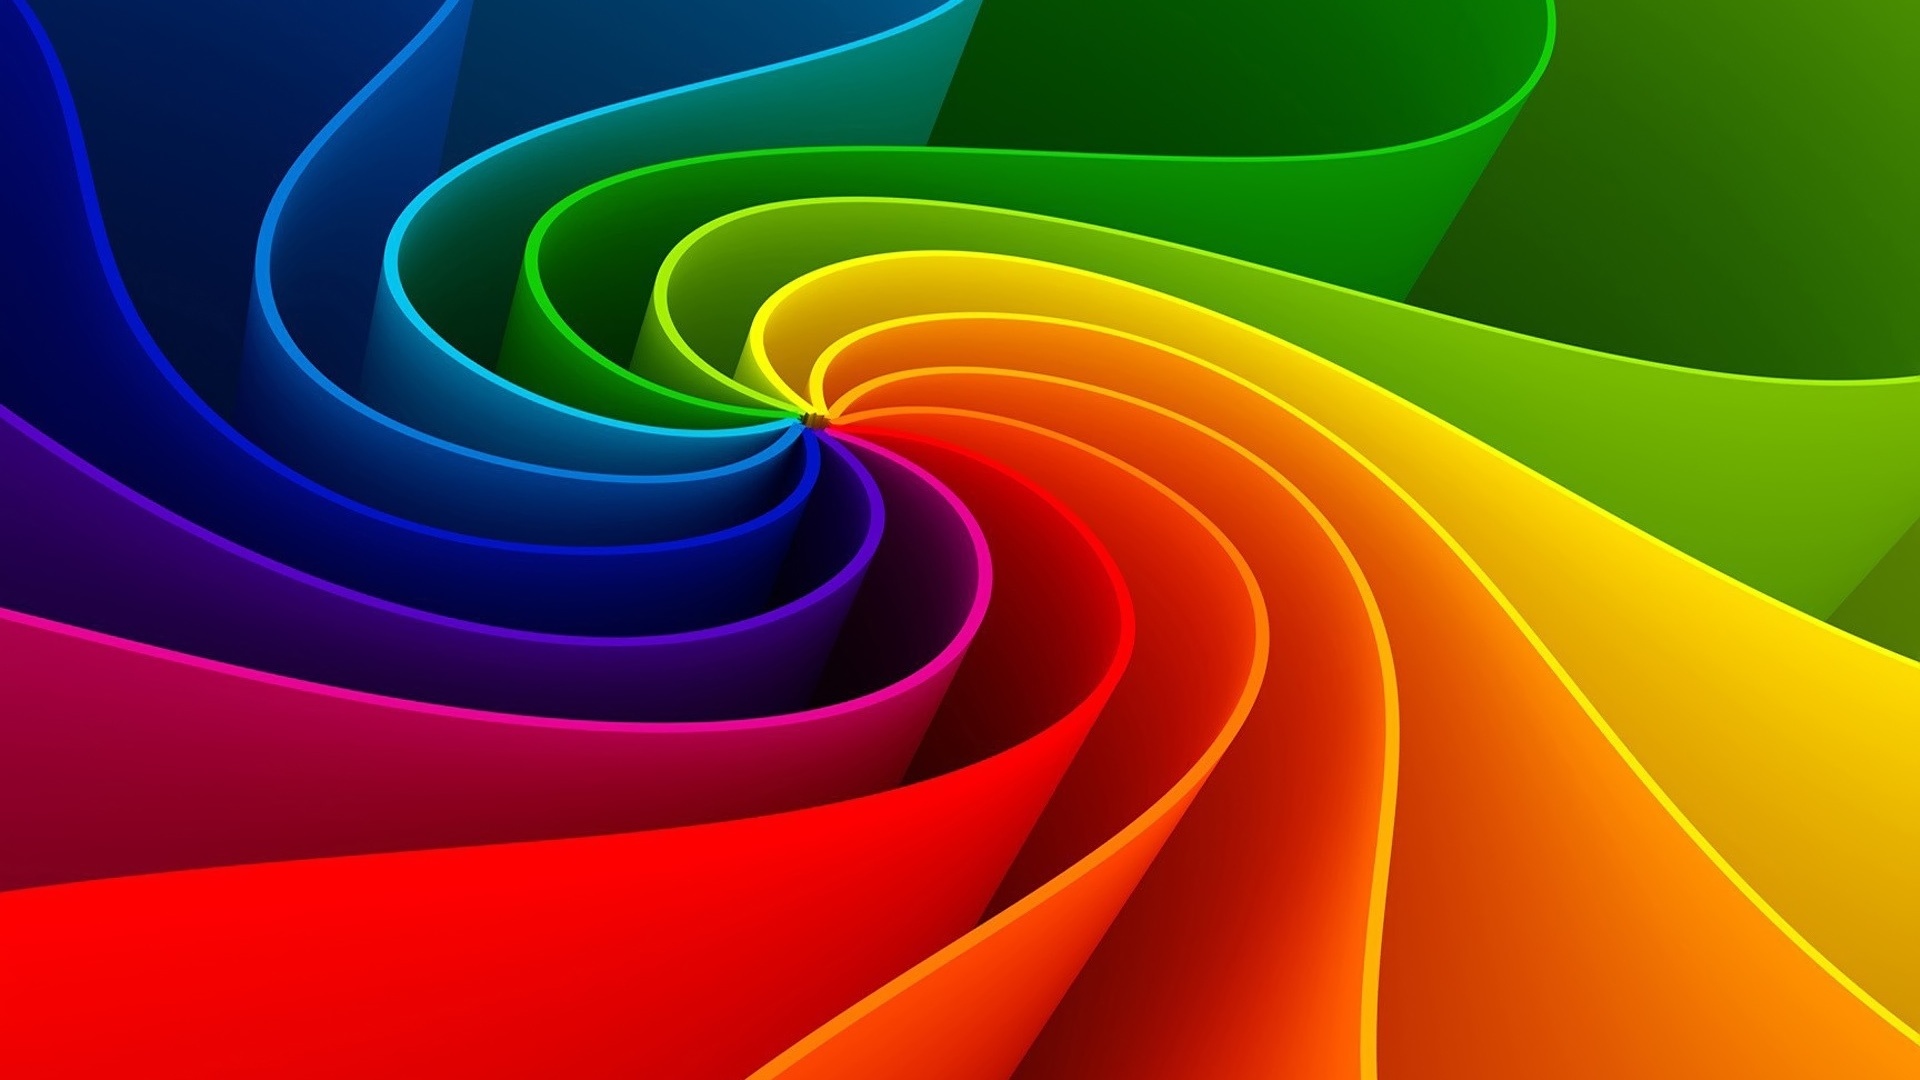 Amazing Colorful Abstract Rainbow 3d HD S Wallpaper